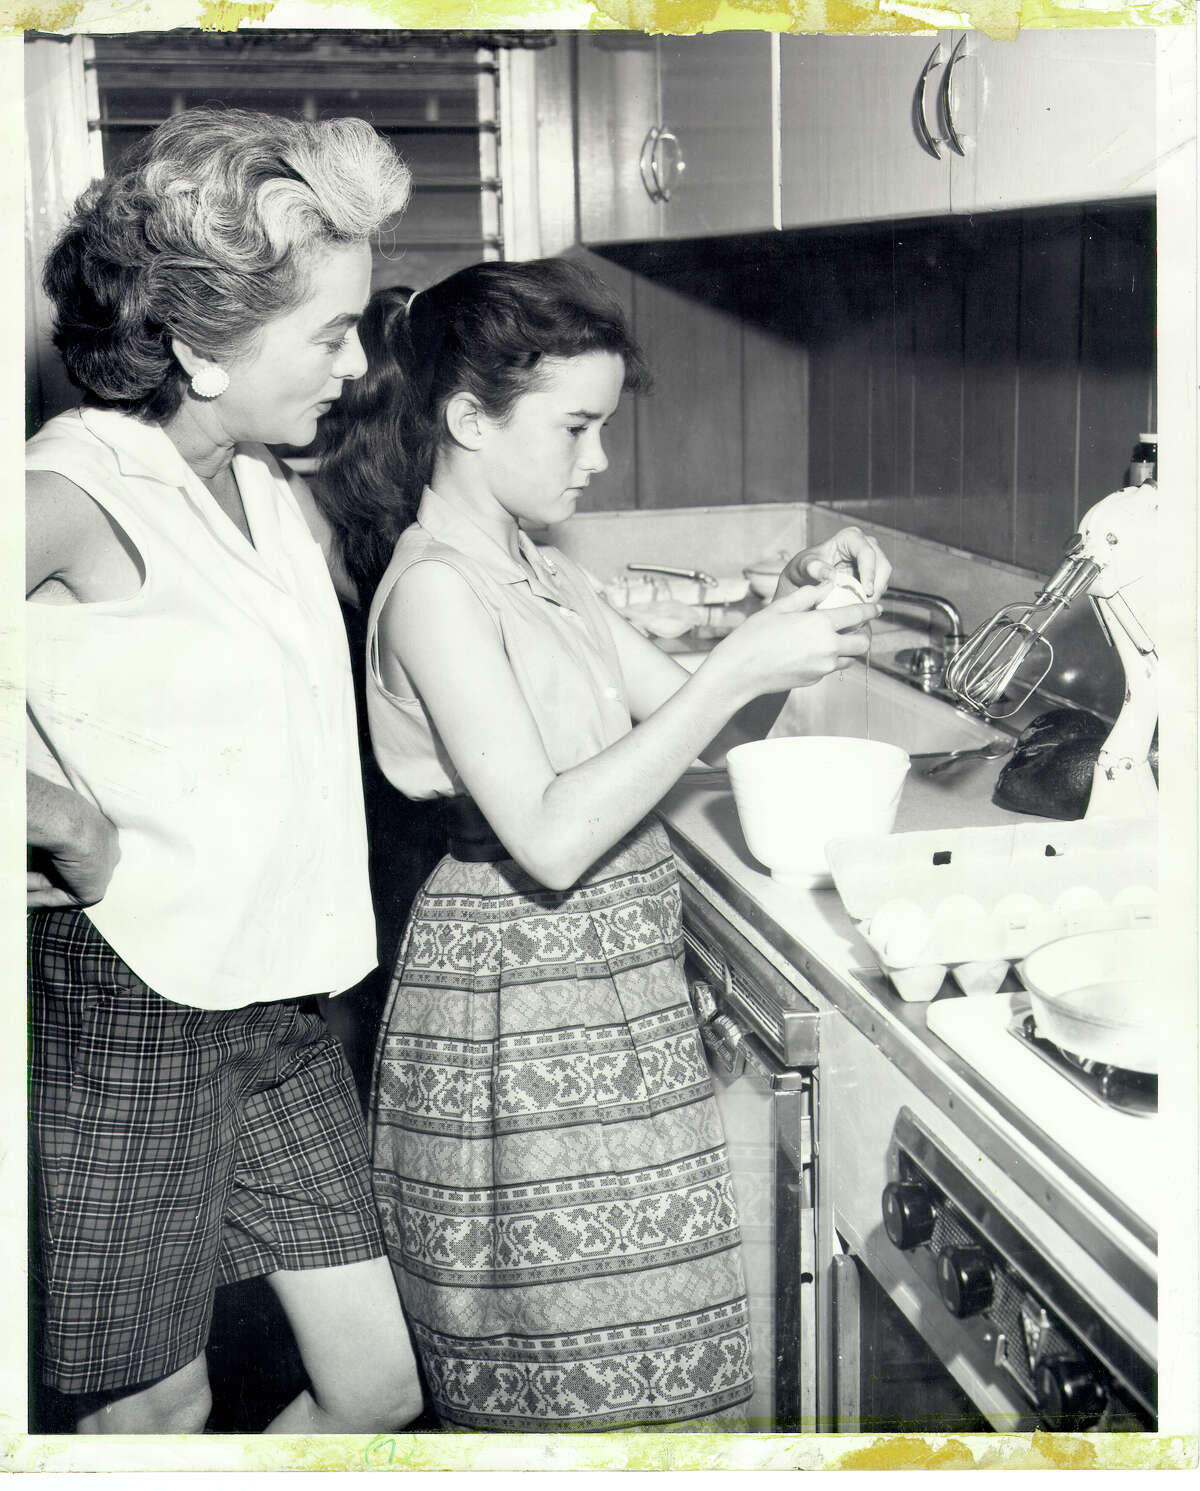 Growing up in Hawaii during the late 1950 and early 60s, Heloise learned to cook with her mother's supervision.